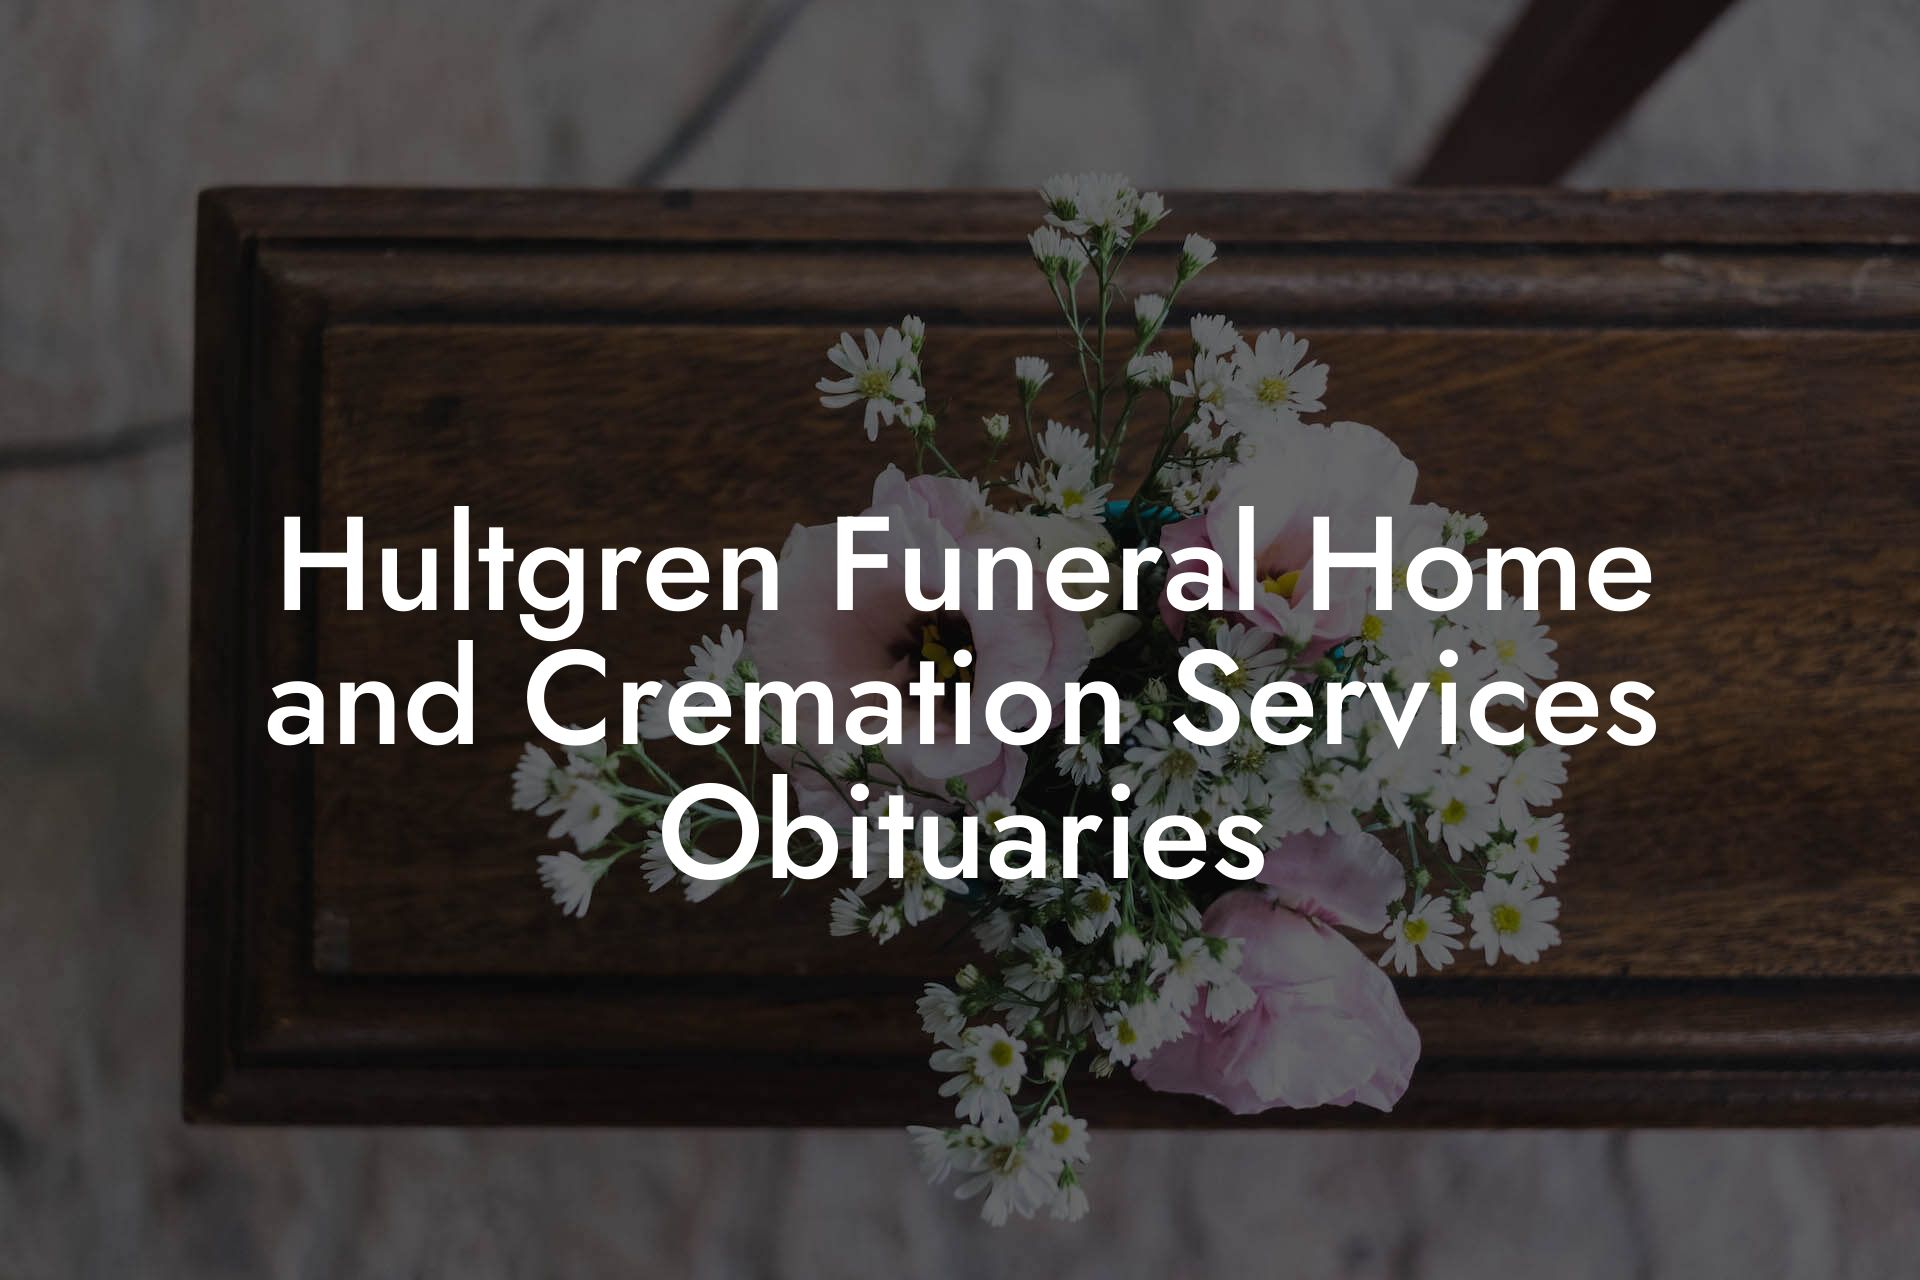 Hultgren Funeral Home and Cremation Services Obituaries